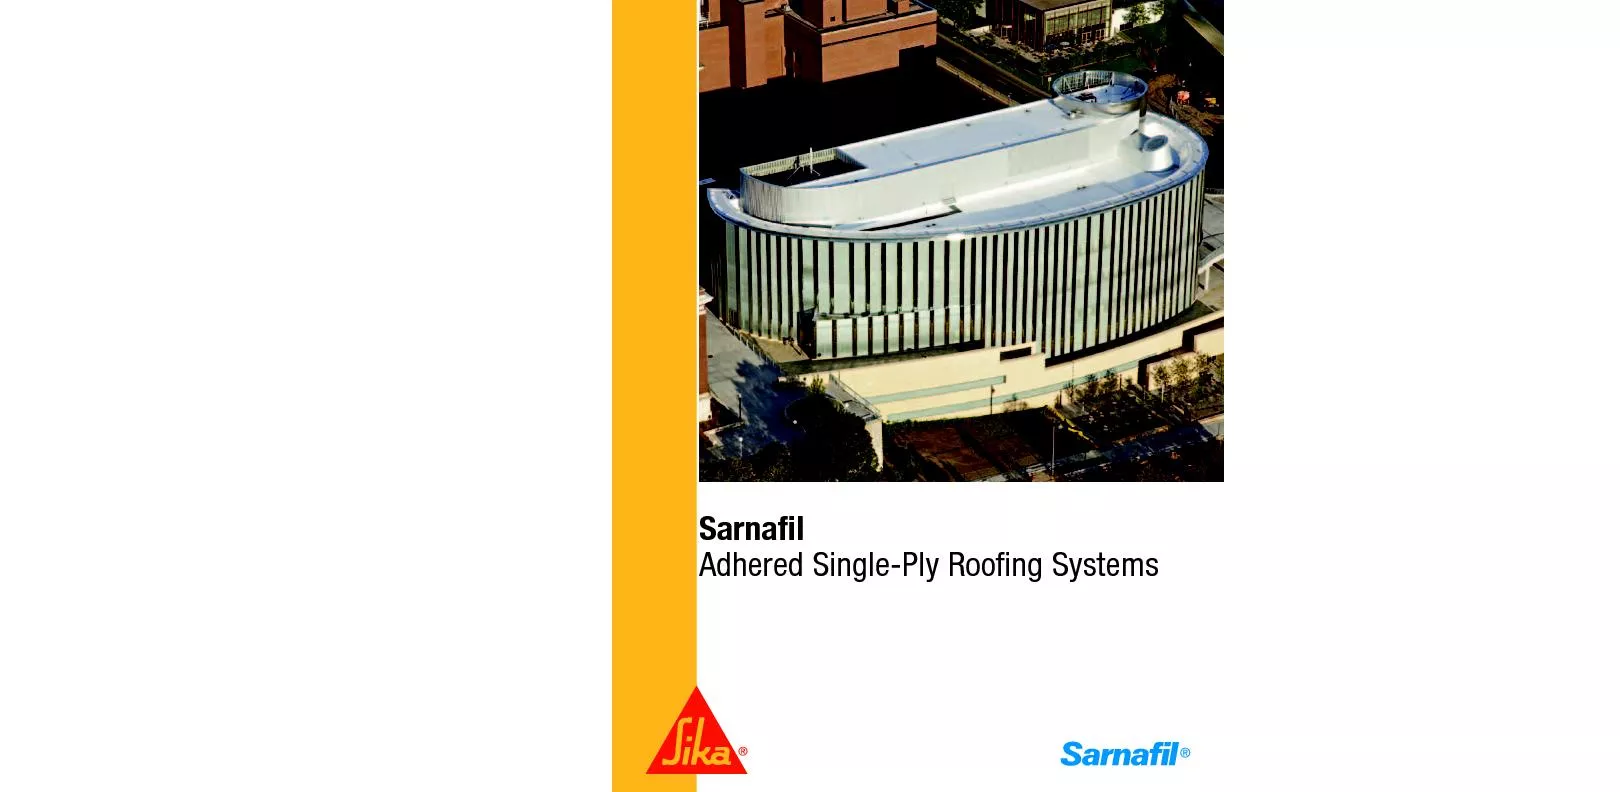 Adhered Single-Ply Roofing Systems